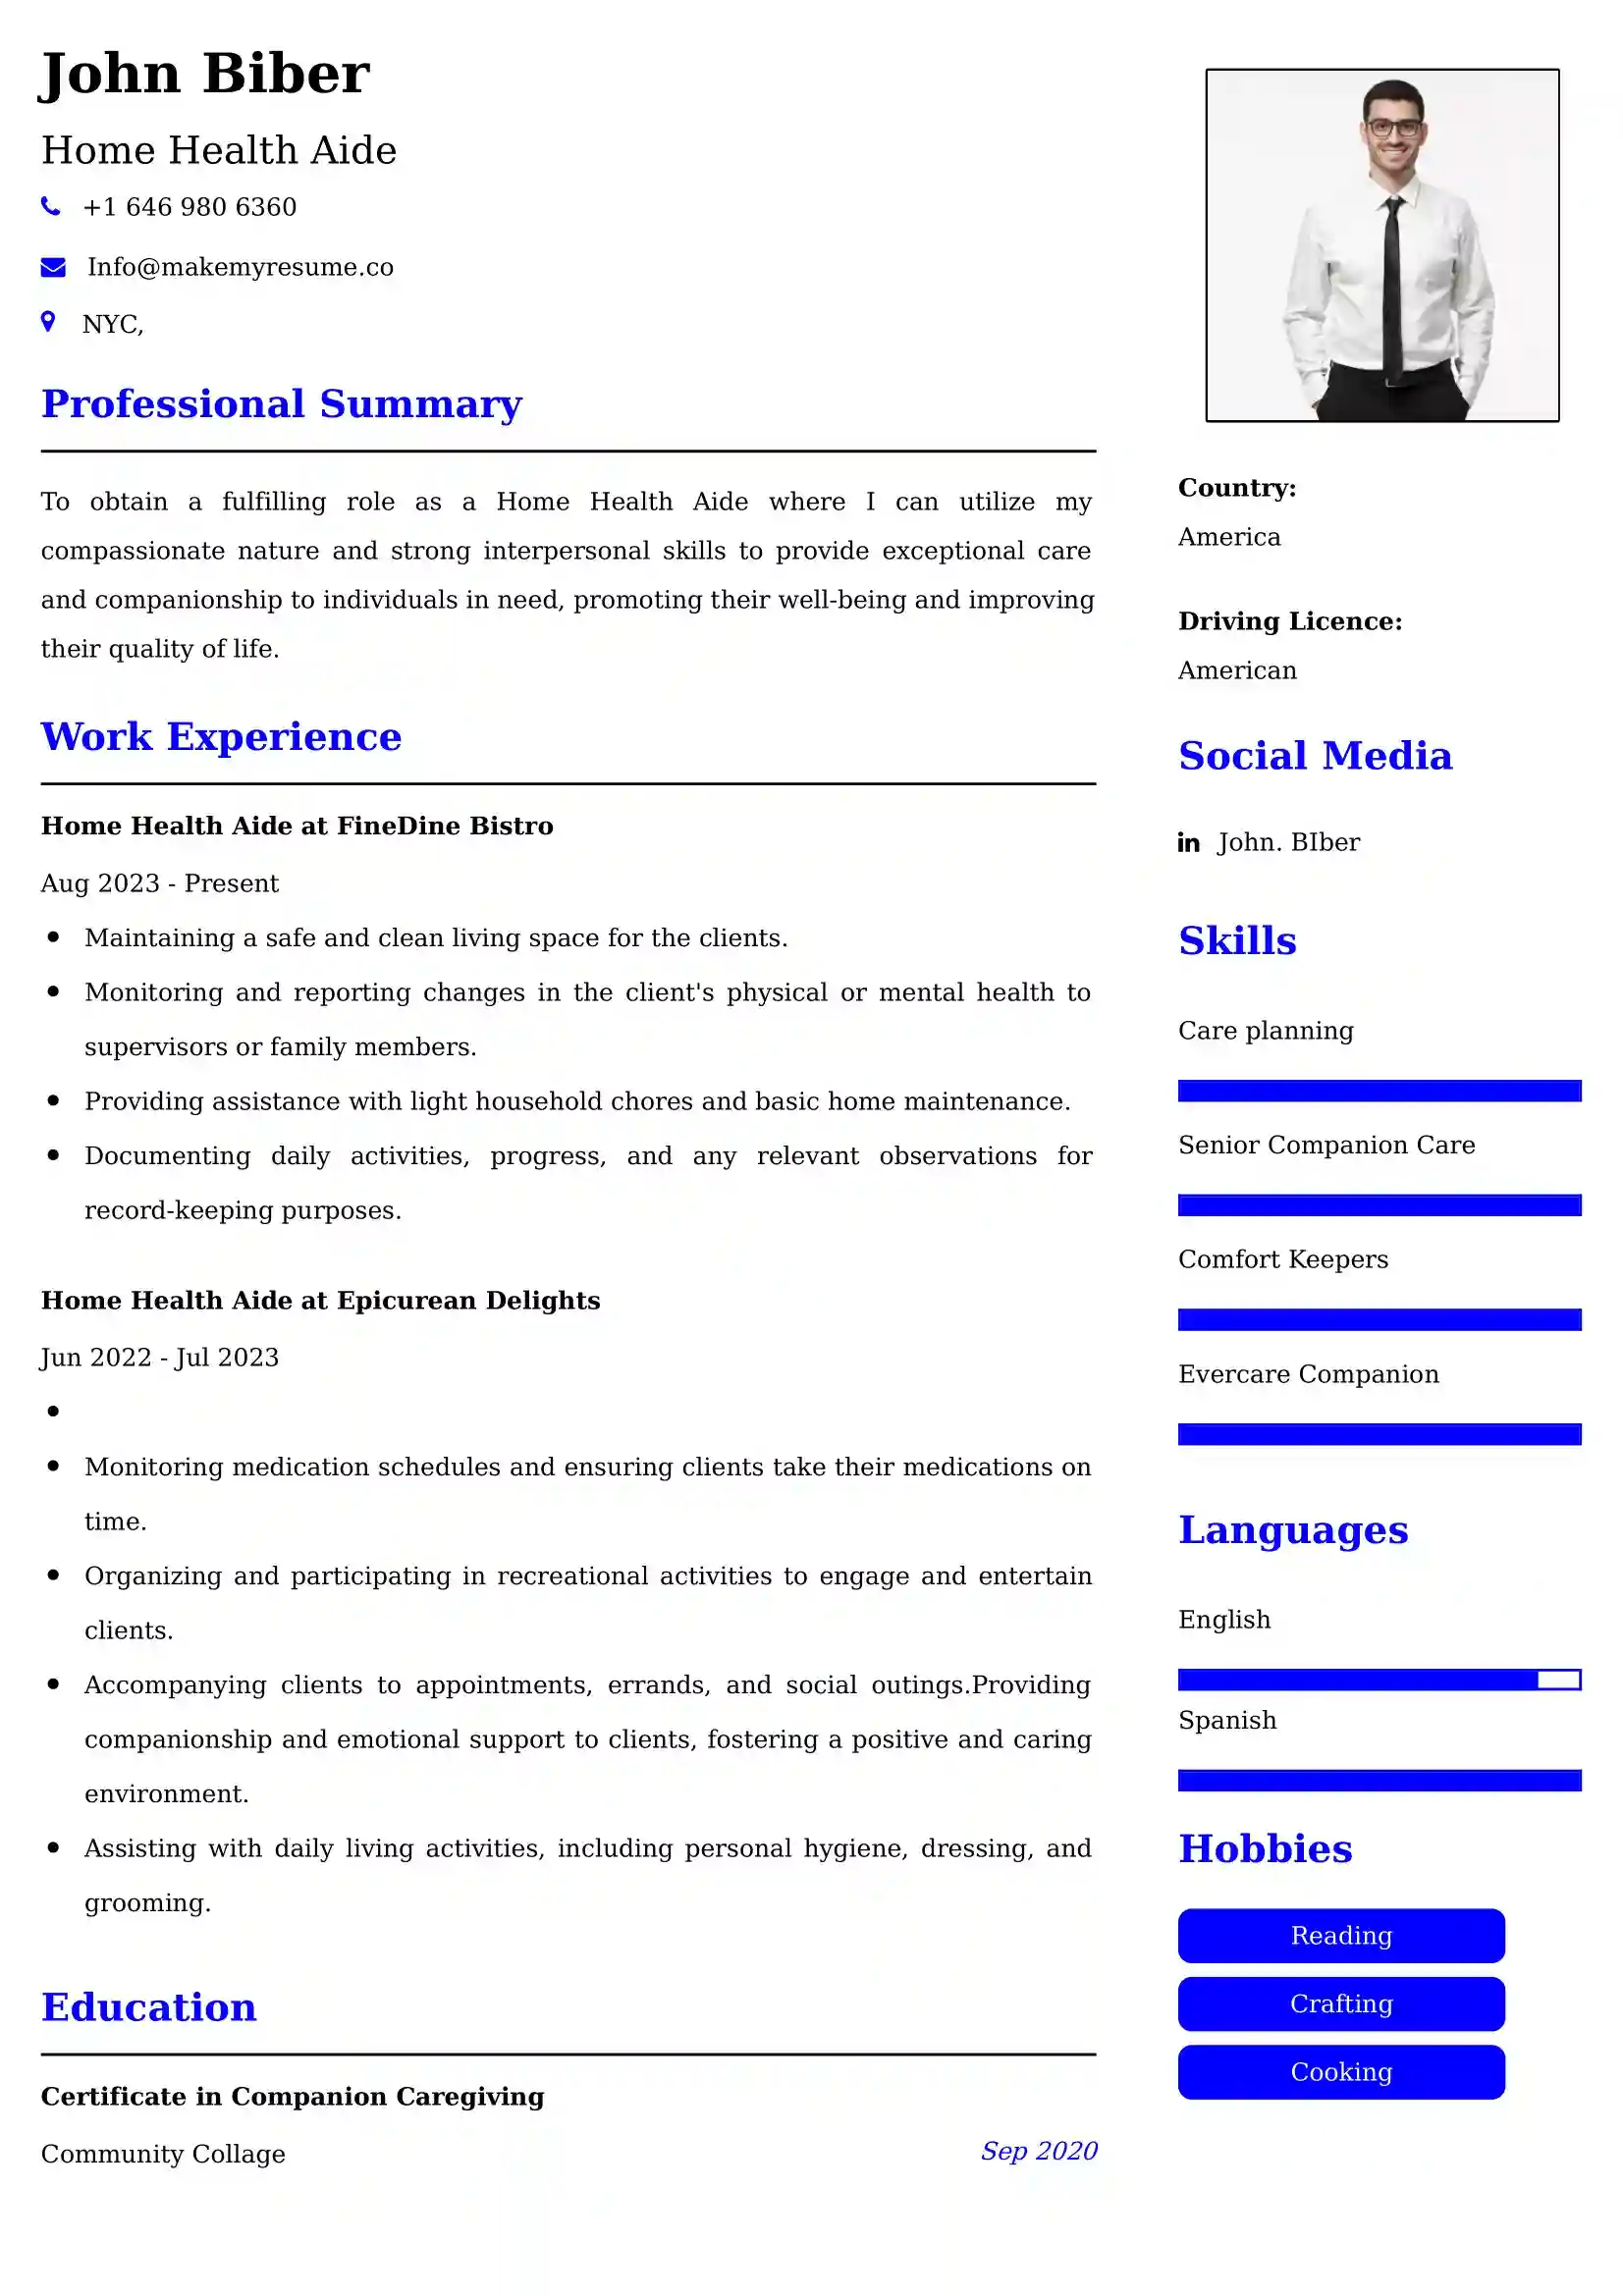 Home Health Aide Resume Examples - UAE Format and Tips.